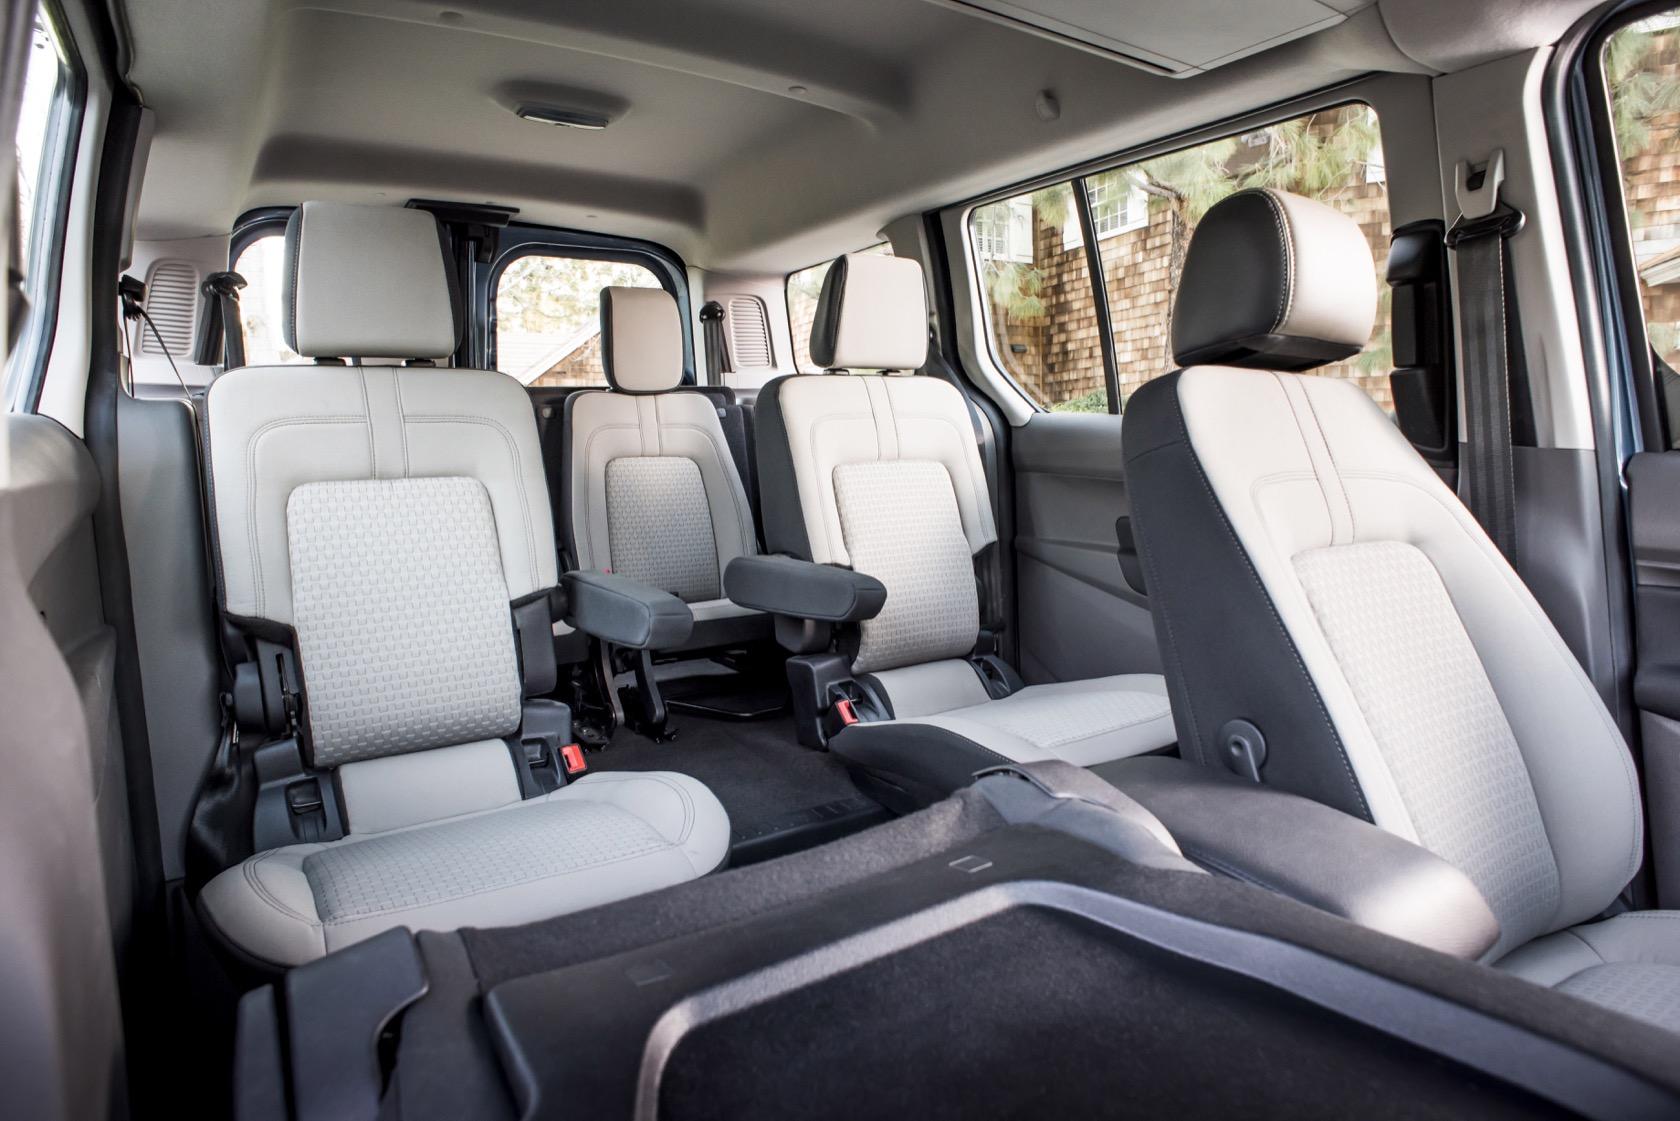 Ford's Transit Connect is much more 